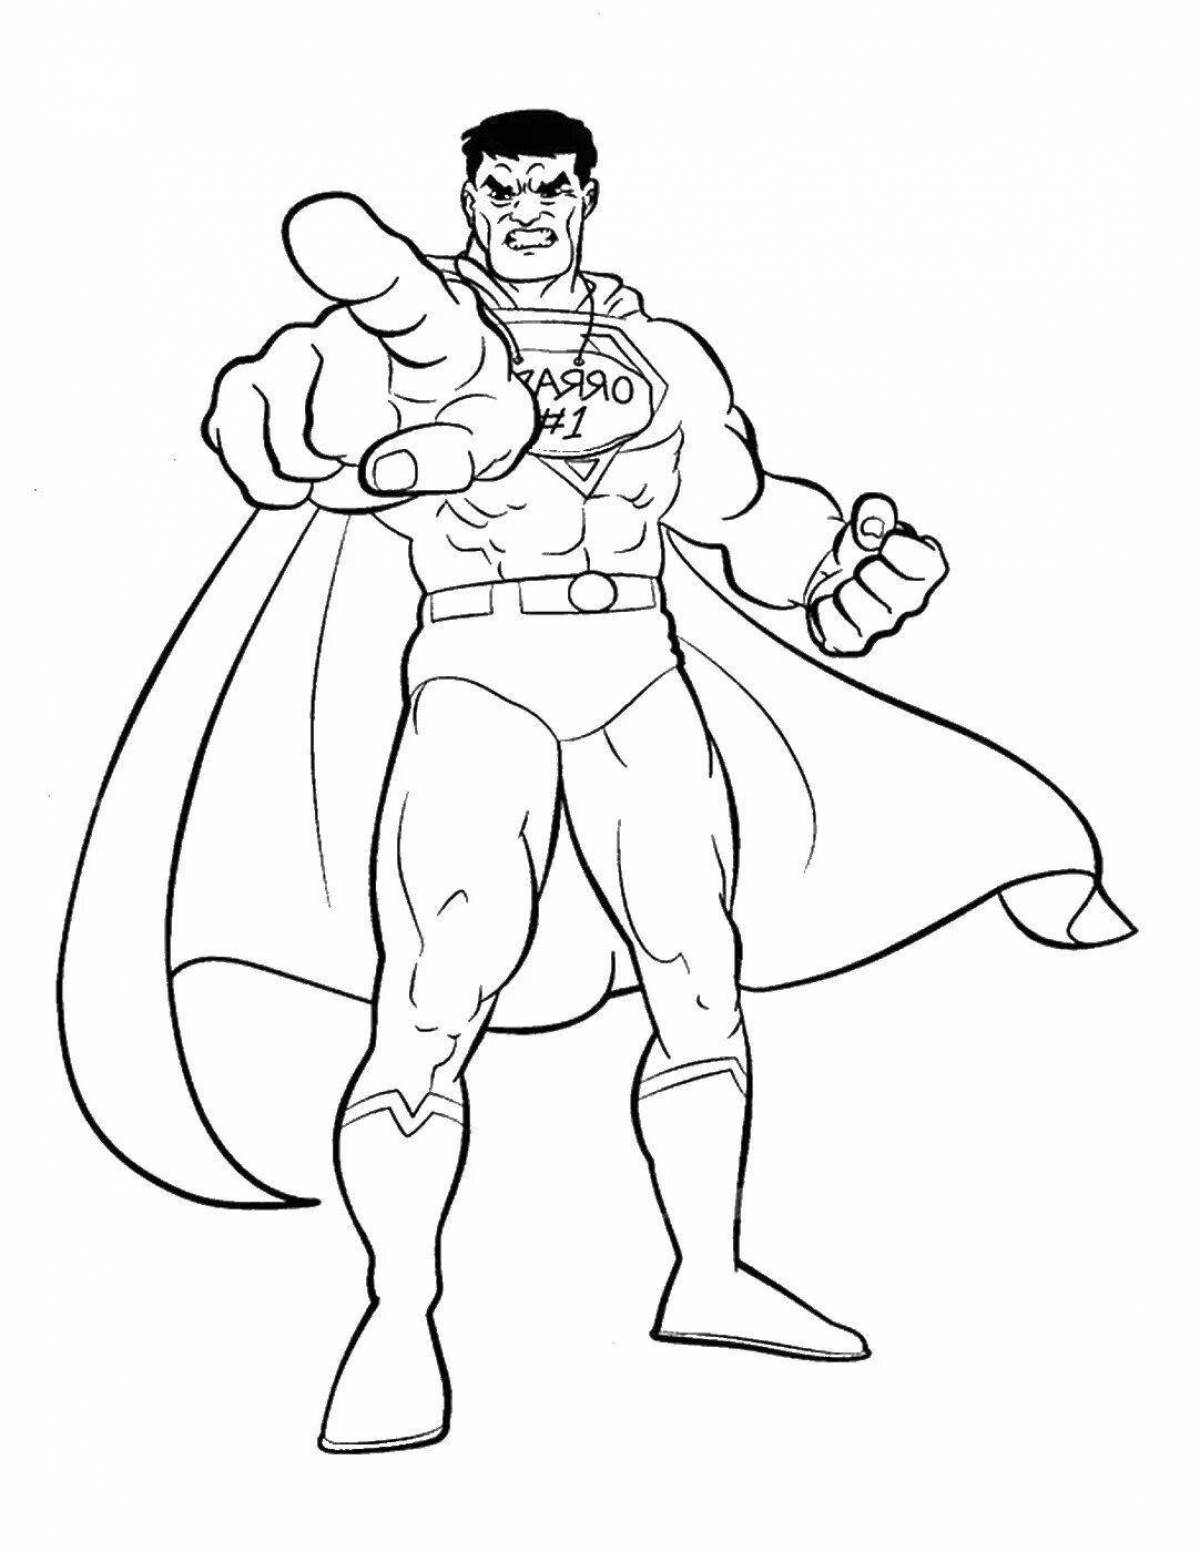 Playful superman and spiderman coloring page